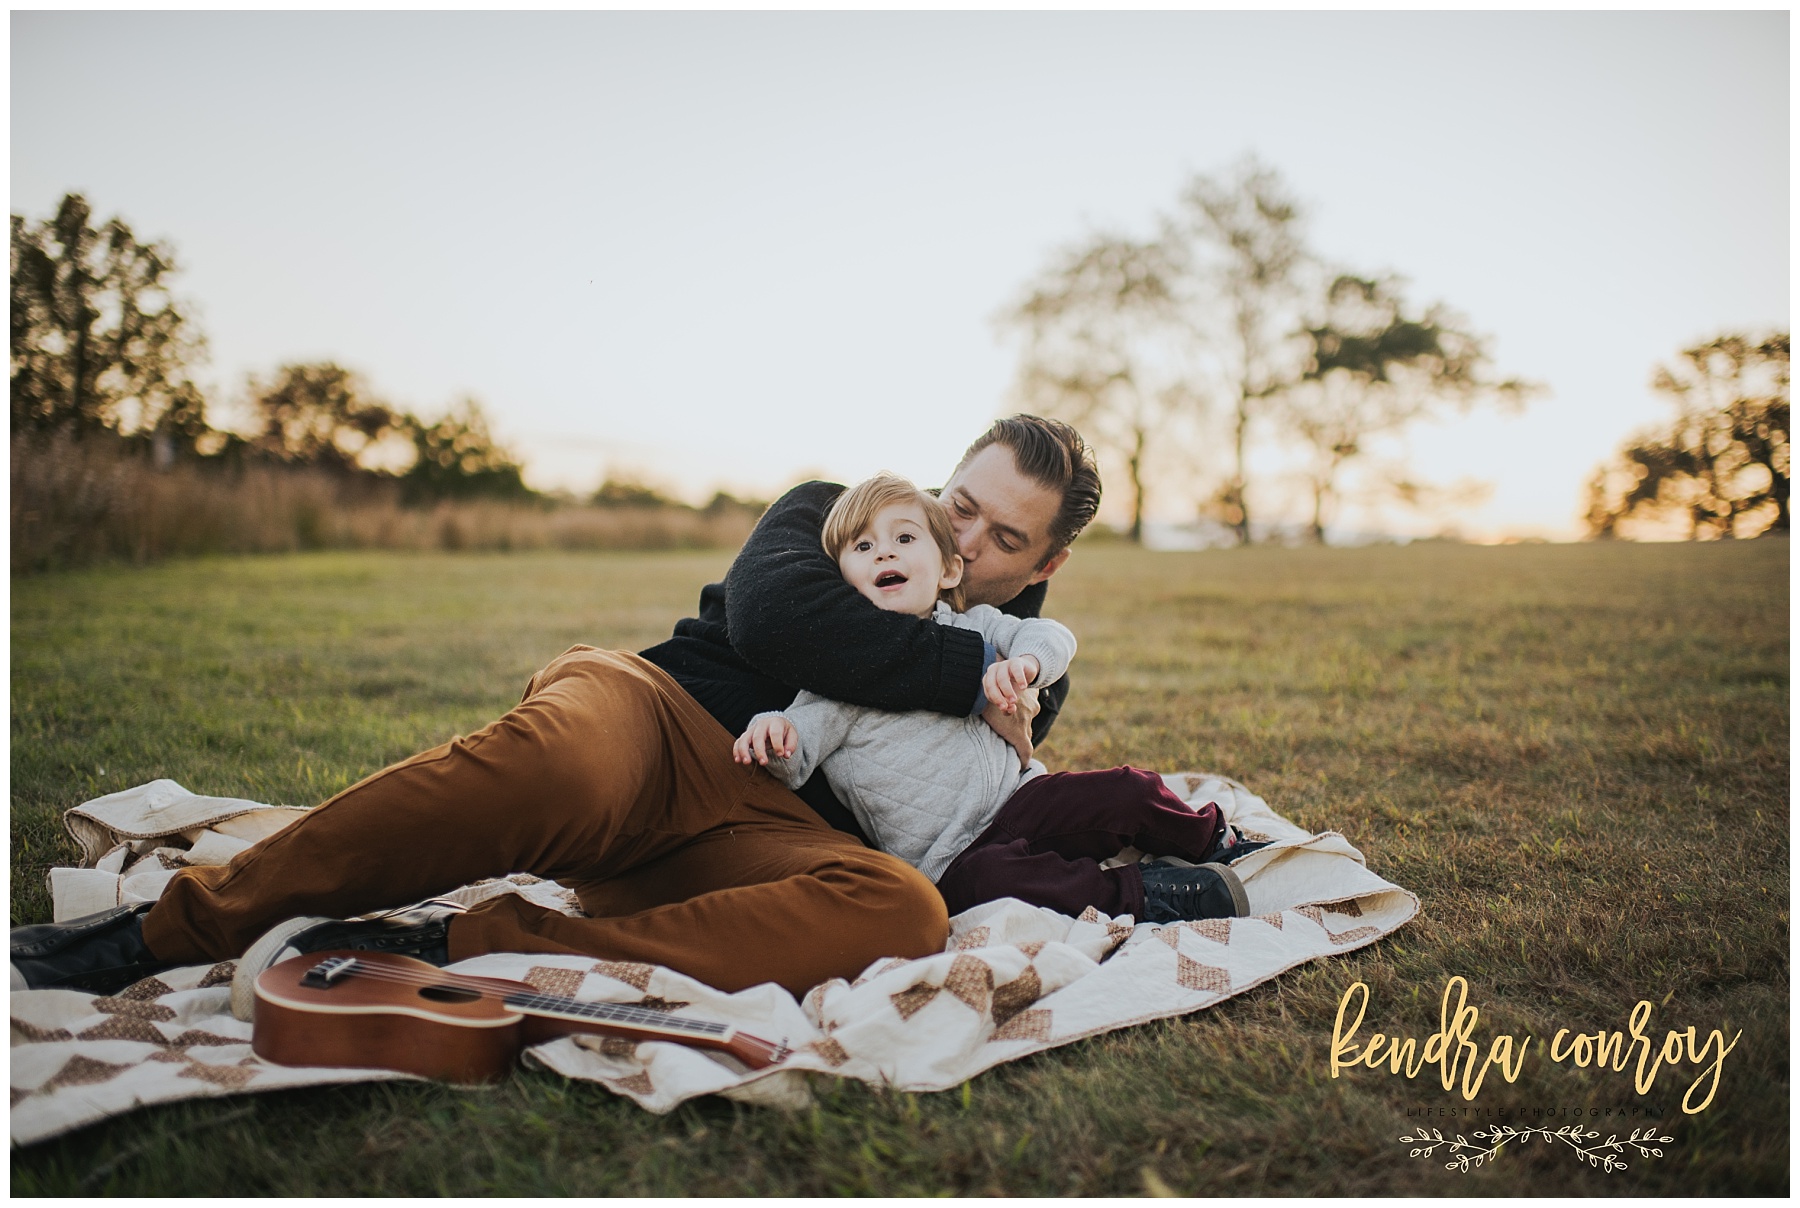 Dad and little son hugging at New Canaan park in Connecticut Kendra Conroy Photography